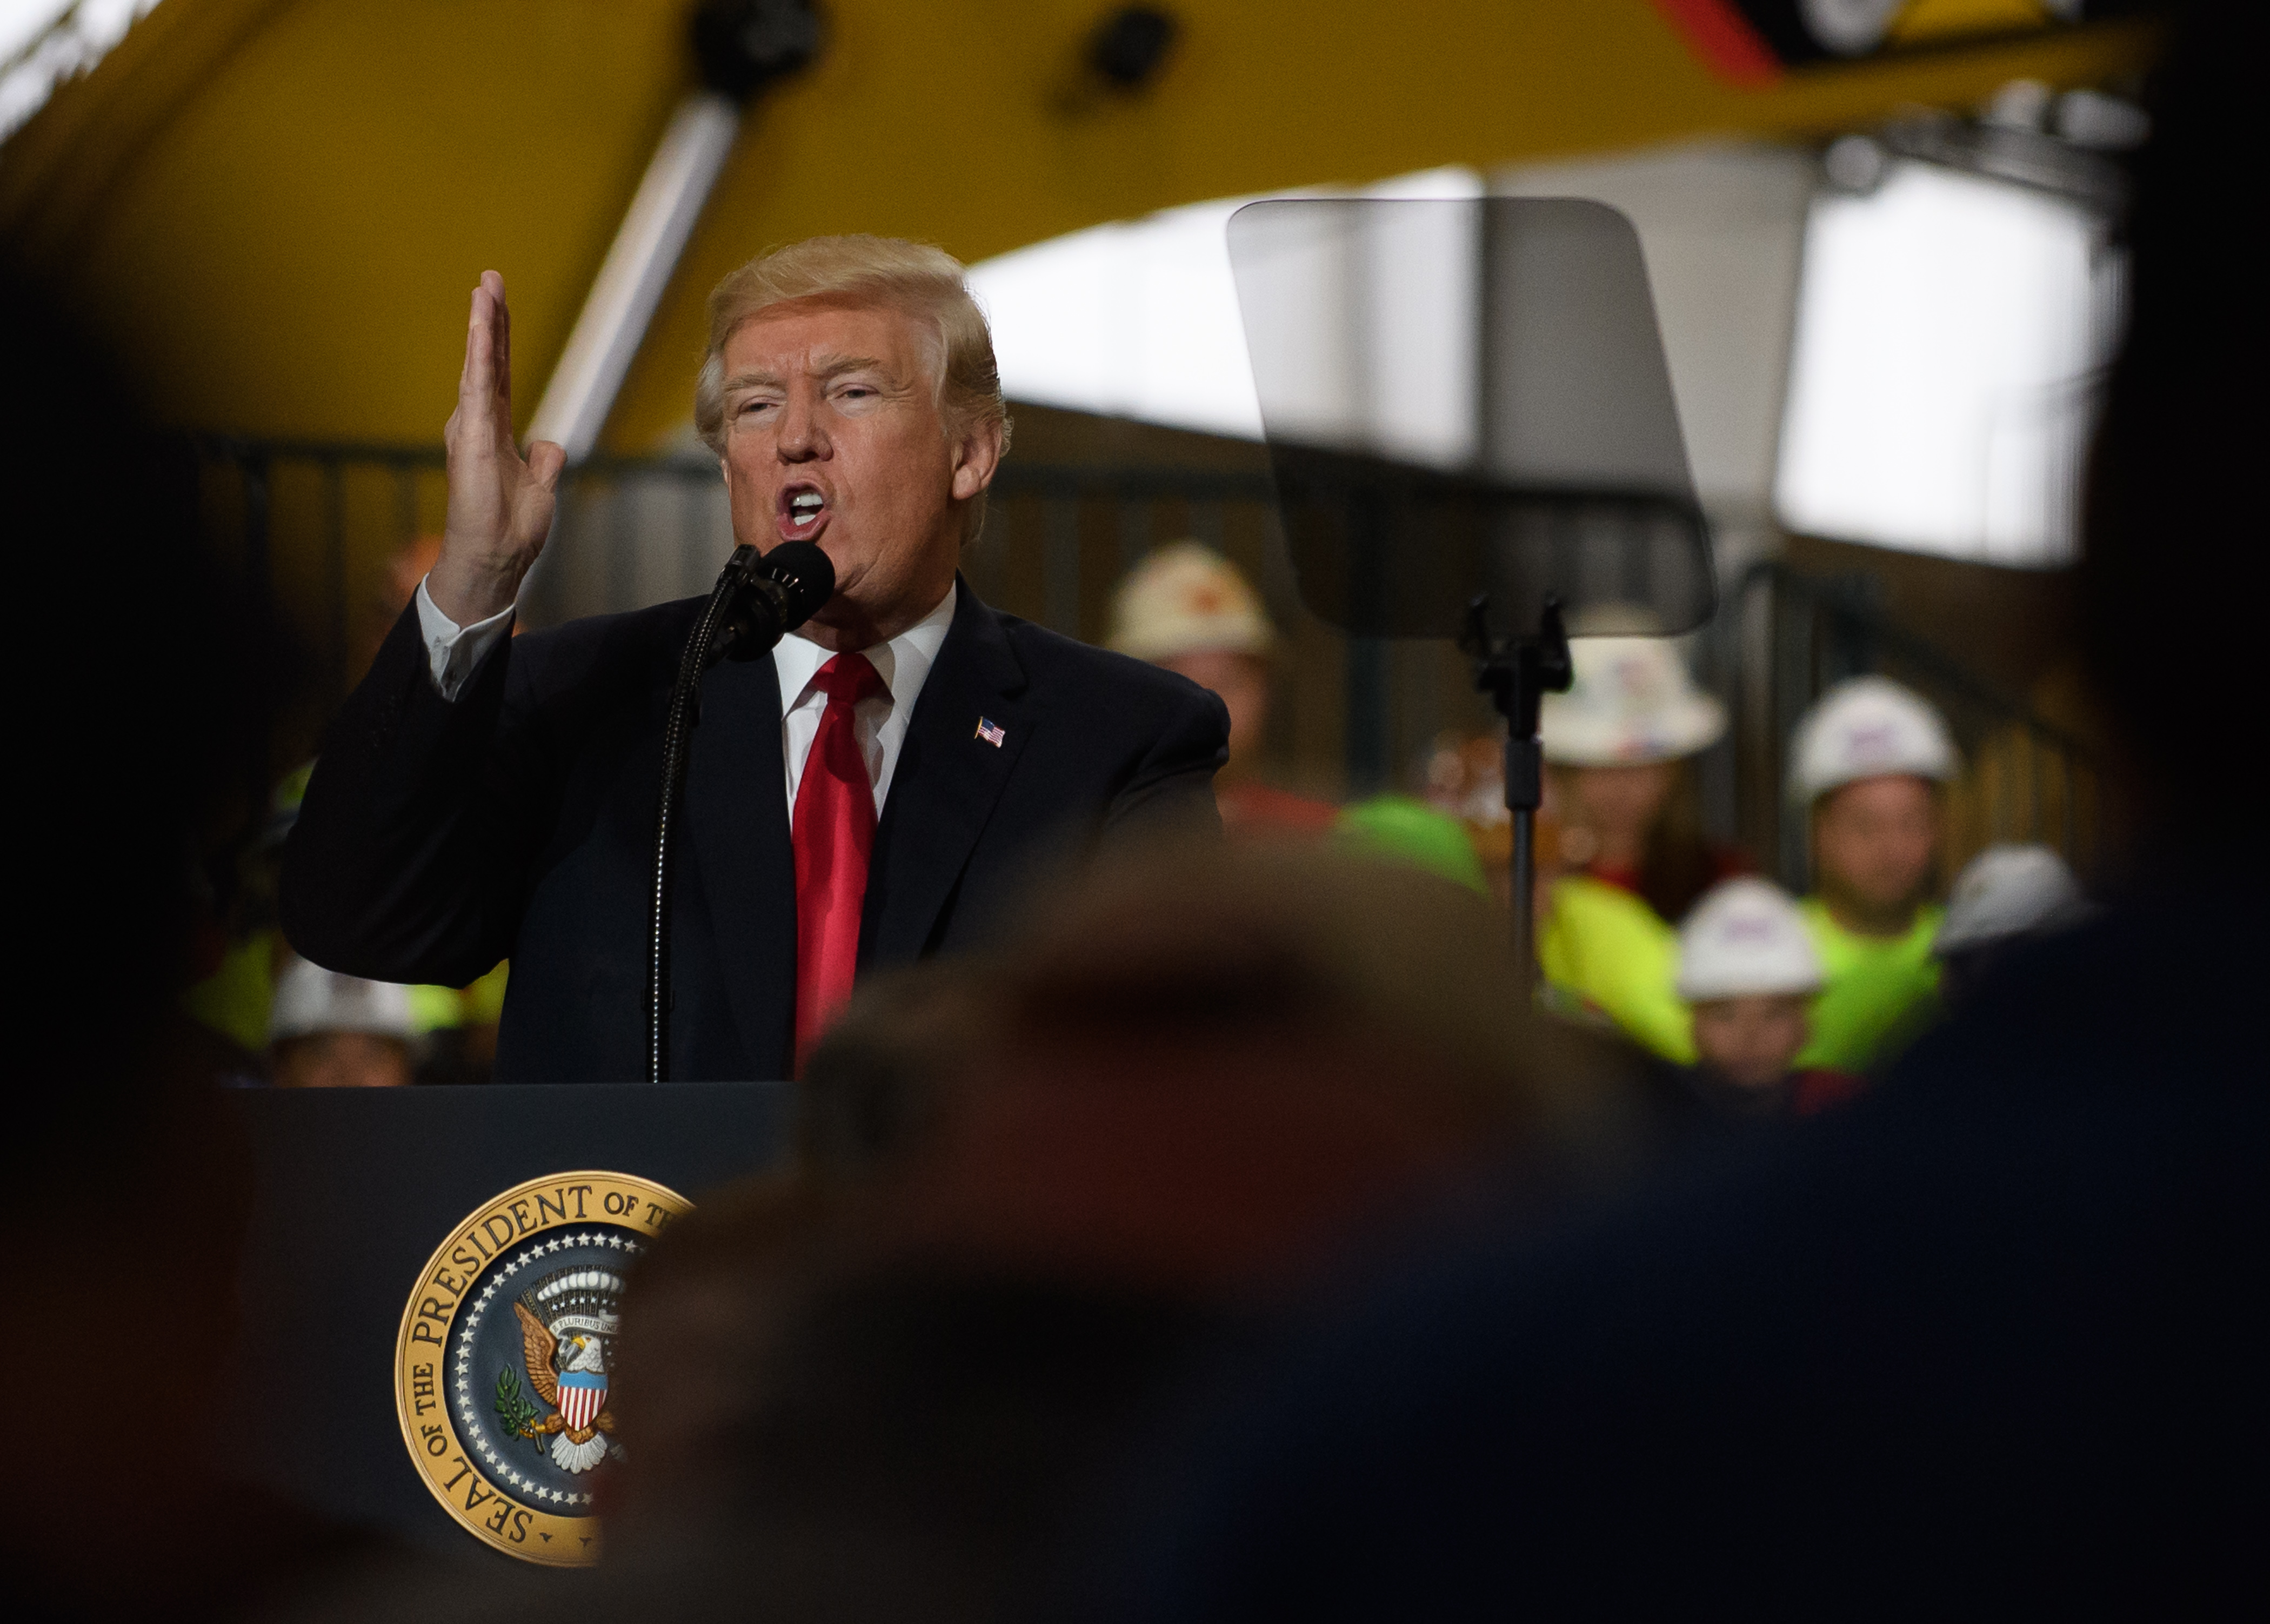 U.S. President Donald Trump speaks to a crowd gathered at the Local 18 Richfield Facility of the Operating Engineers Apprentice and Training, a union and apprentice training center specializing in the repair and operation of heavy equipment on March 29, 2018 in Richfield, Ohio. (Jeff Swensen—Getty Images)